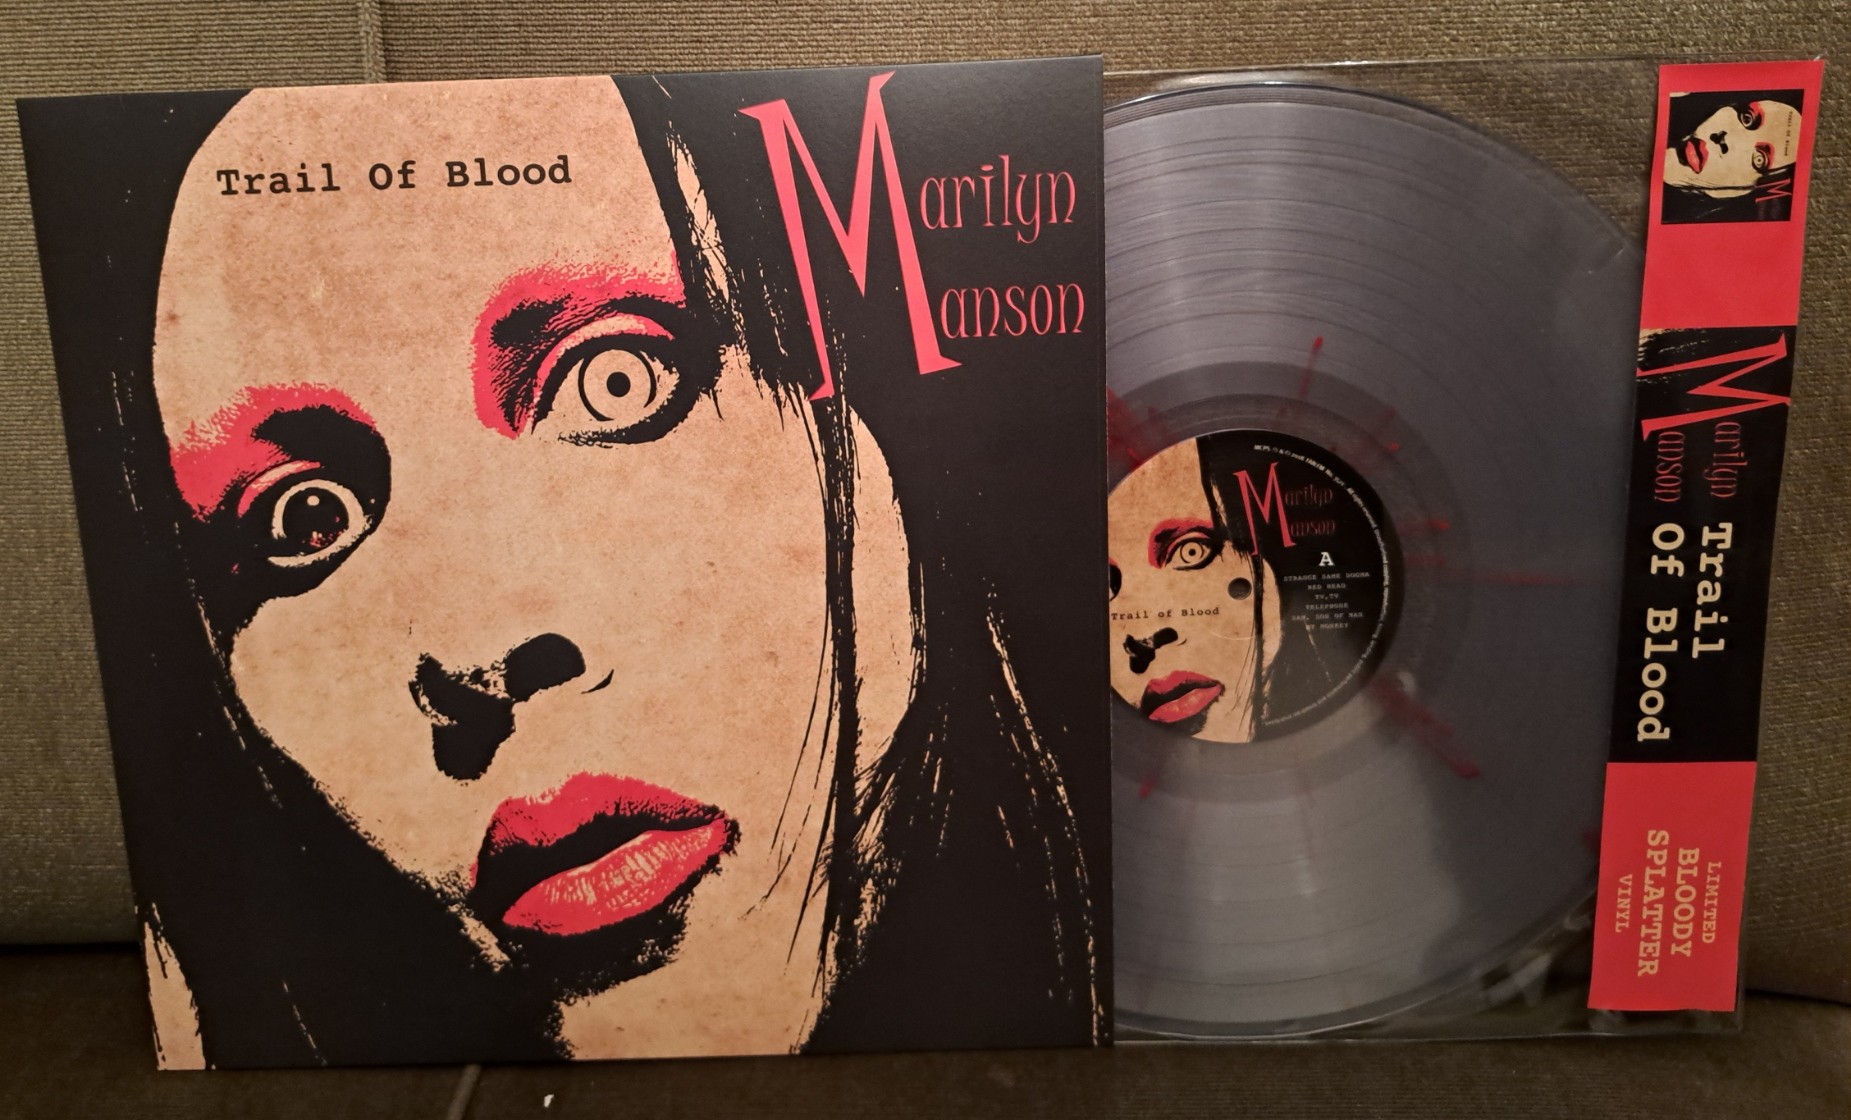 Marilyn Manson's "Trail Of Blood", an unofficial record on a blood splattered transparent vinyl (limited edition).